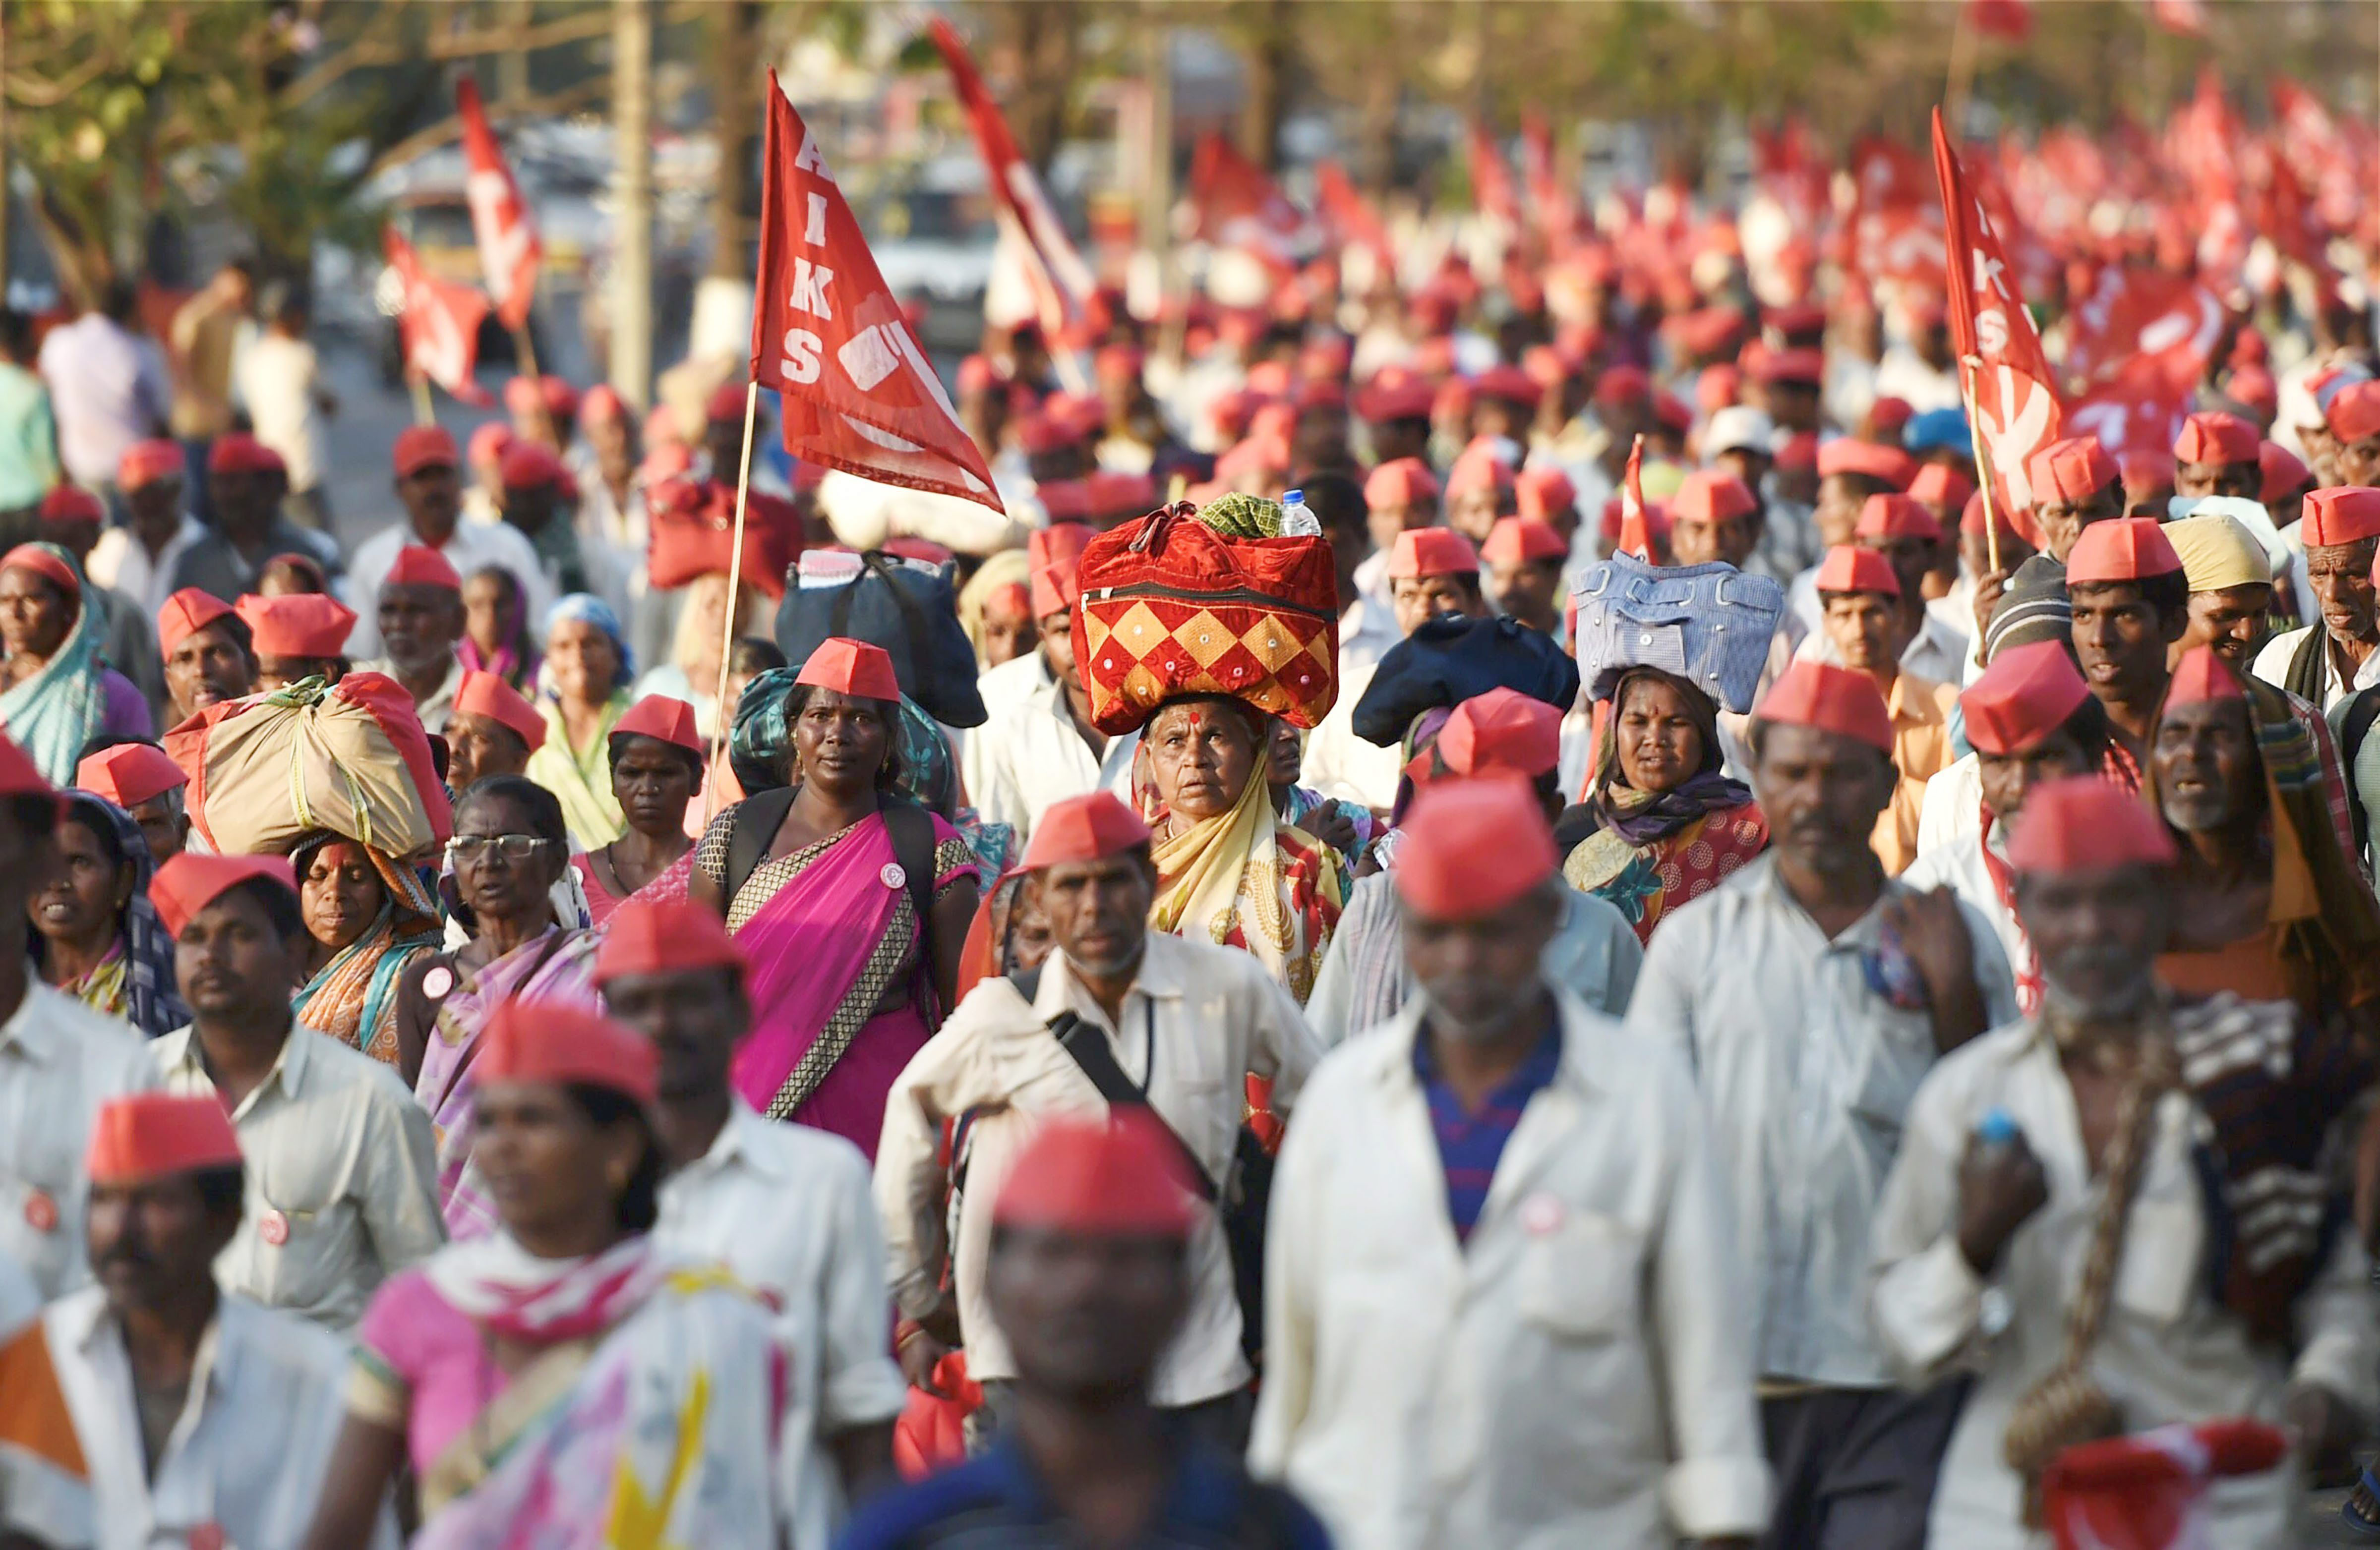 Kisan Long March: Here's why the farmers are protesting